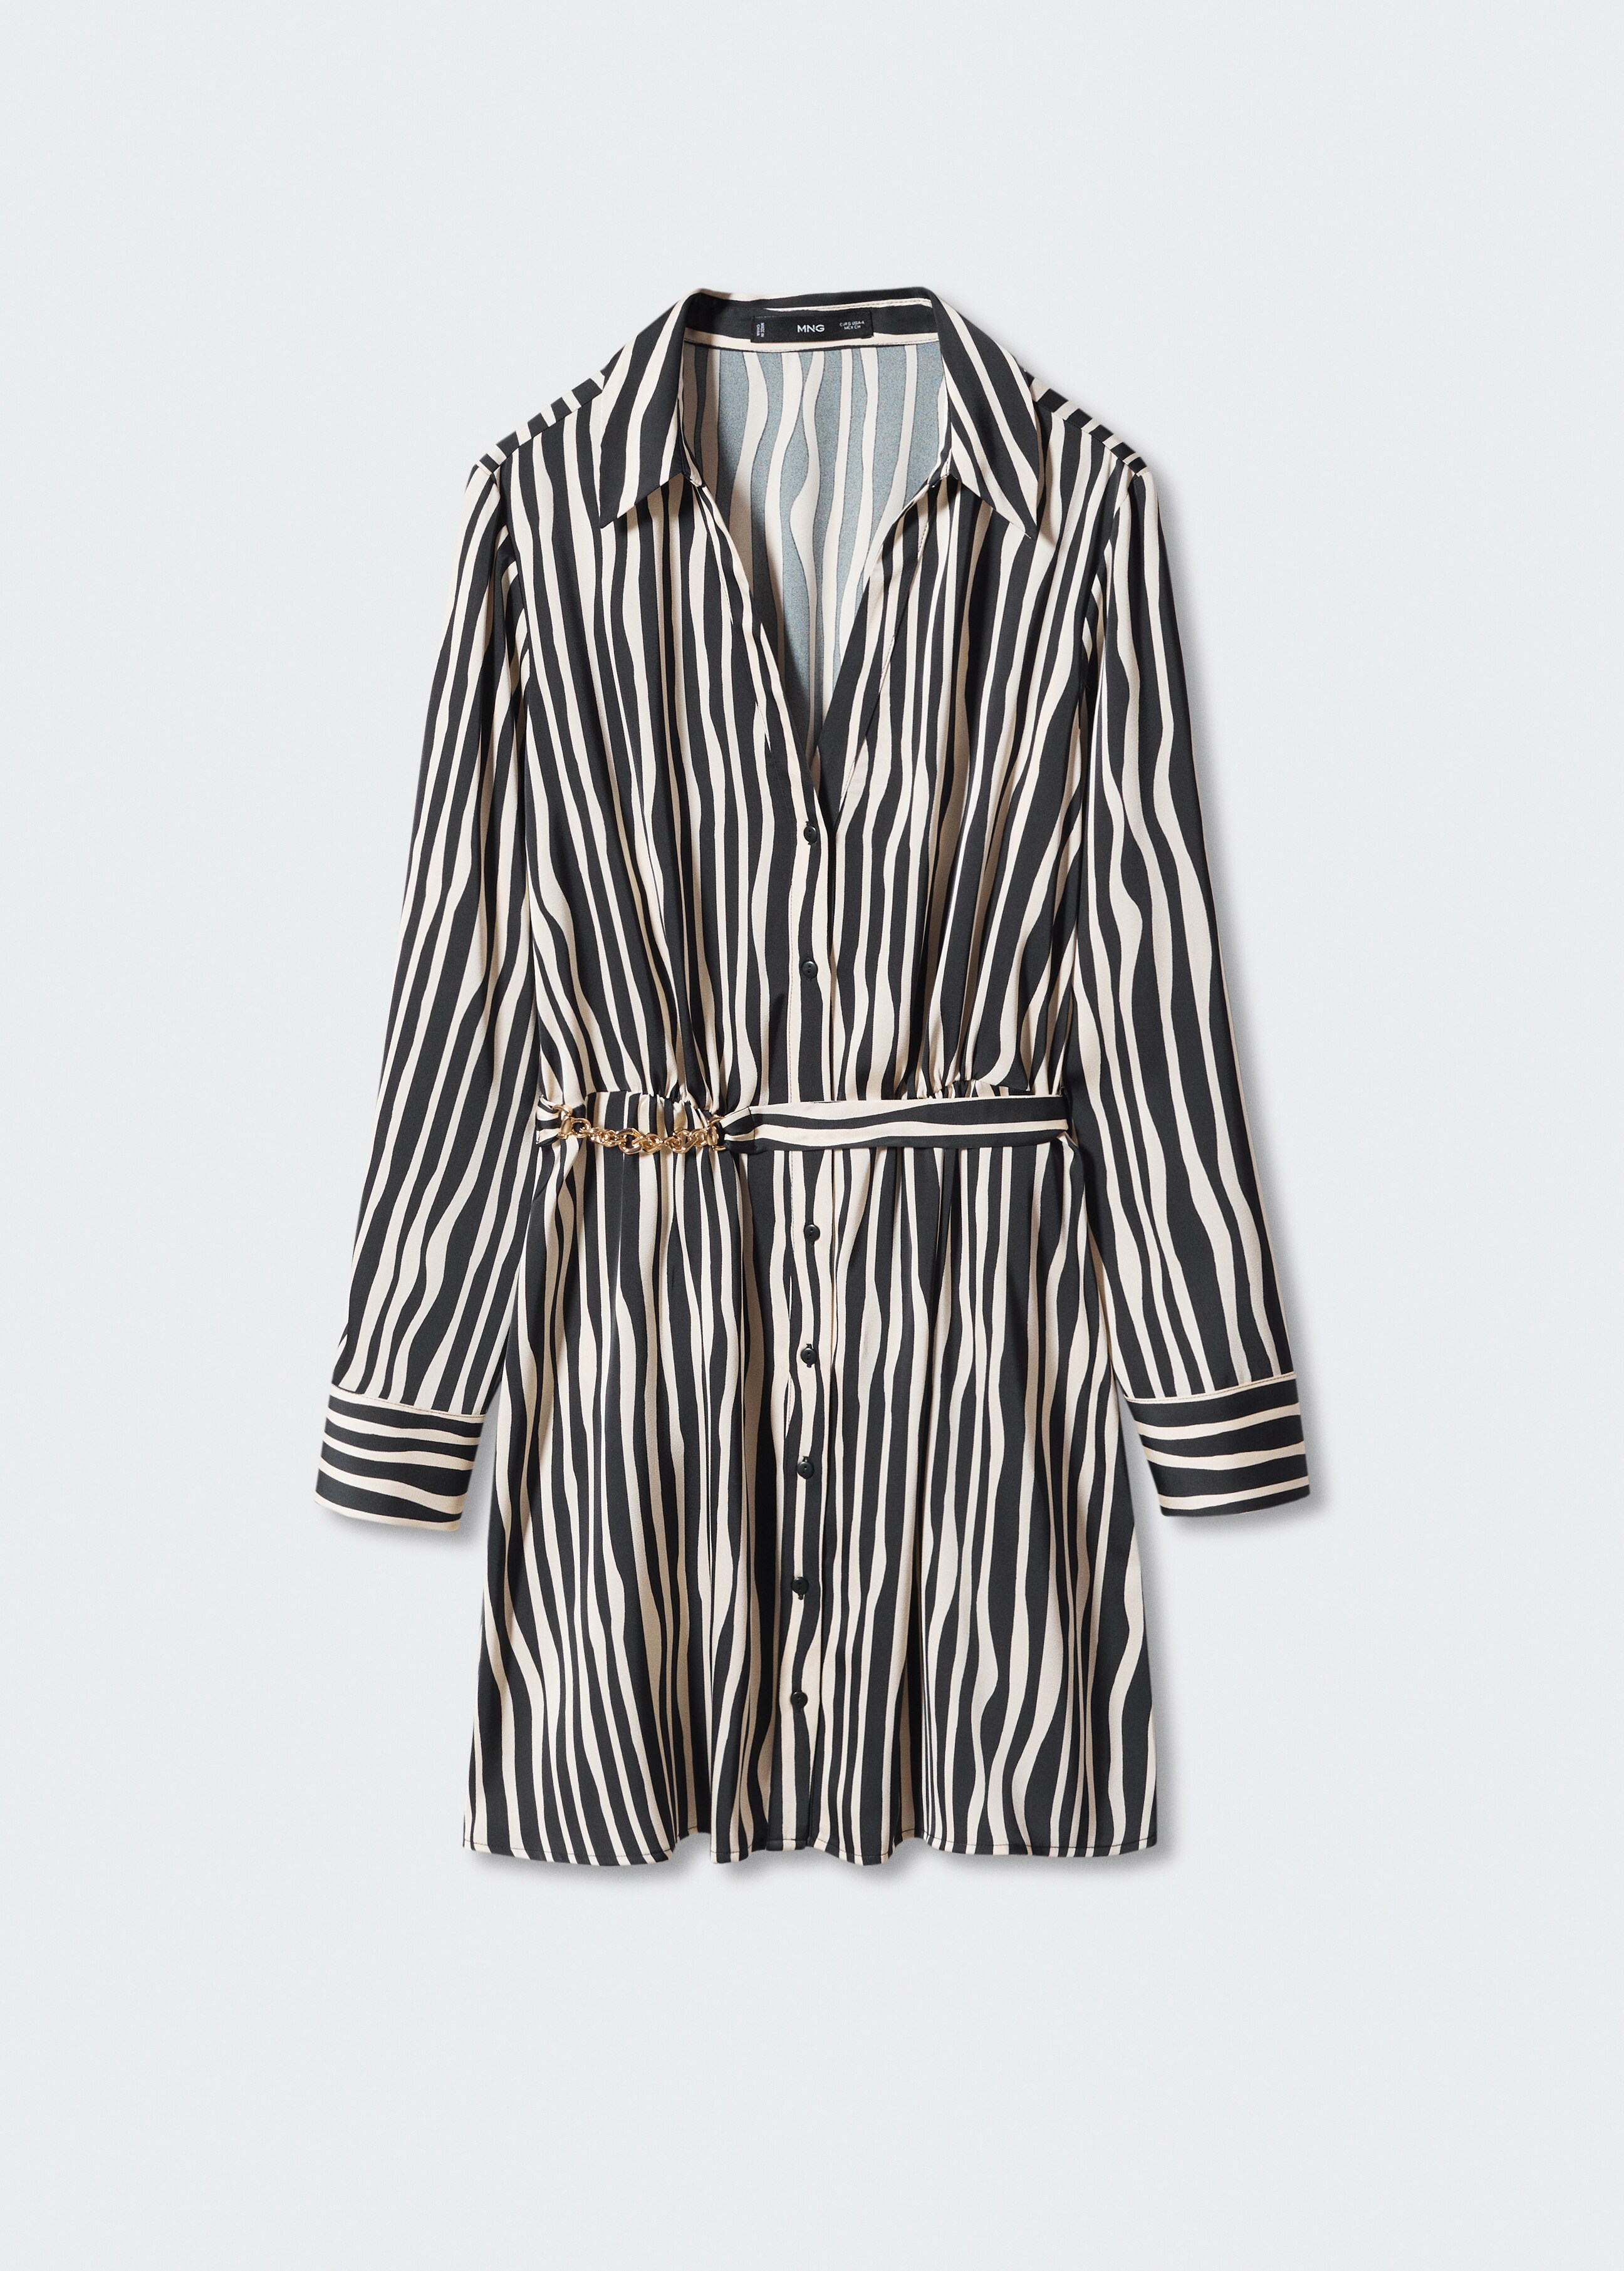 Belted striped shirt dress - Article without model